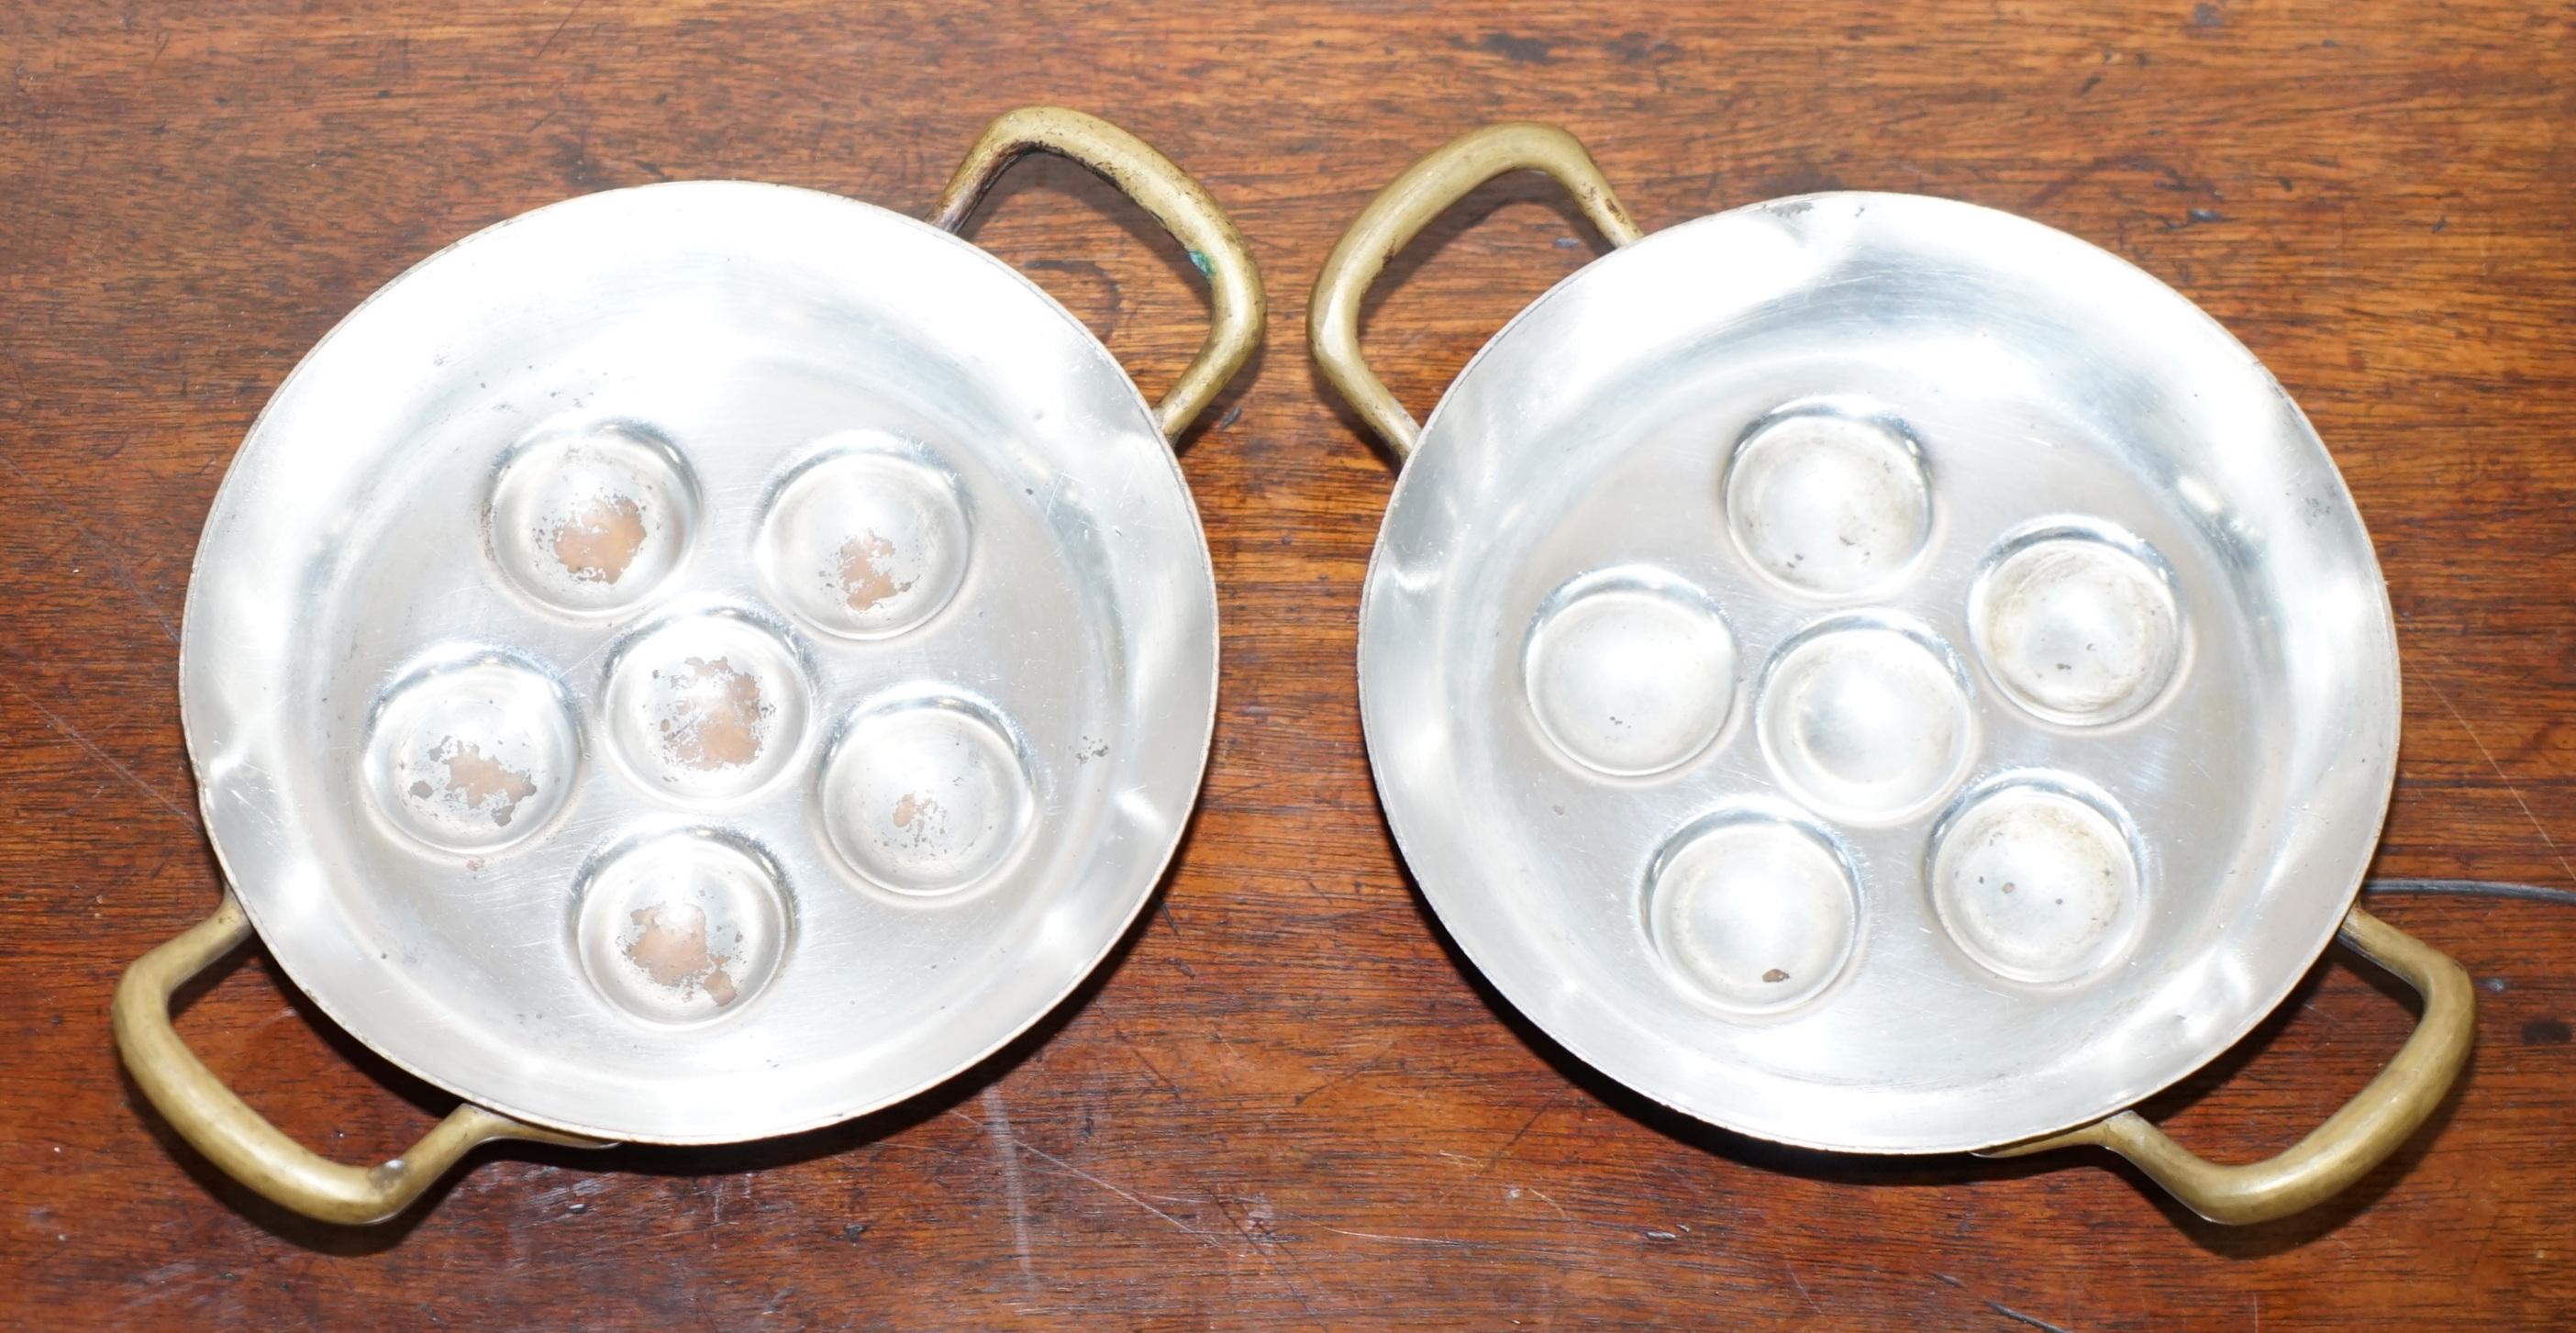 We are delighted to offer for sale this stunning pair of vintage Culinox Snail pans with copper outers and silver plated inners

A very good looking and decorative pair of pans, both are stamped made in Sweden with the Culinox label

We have